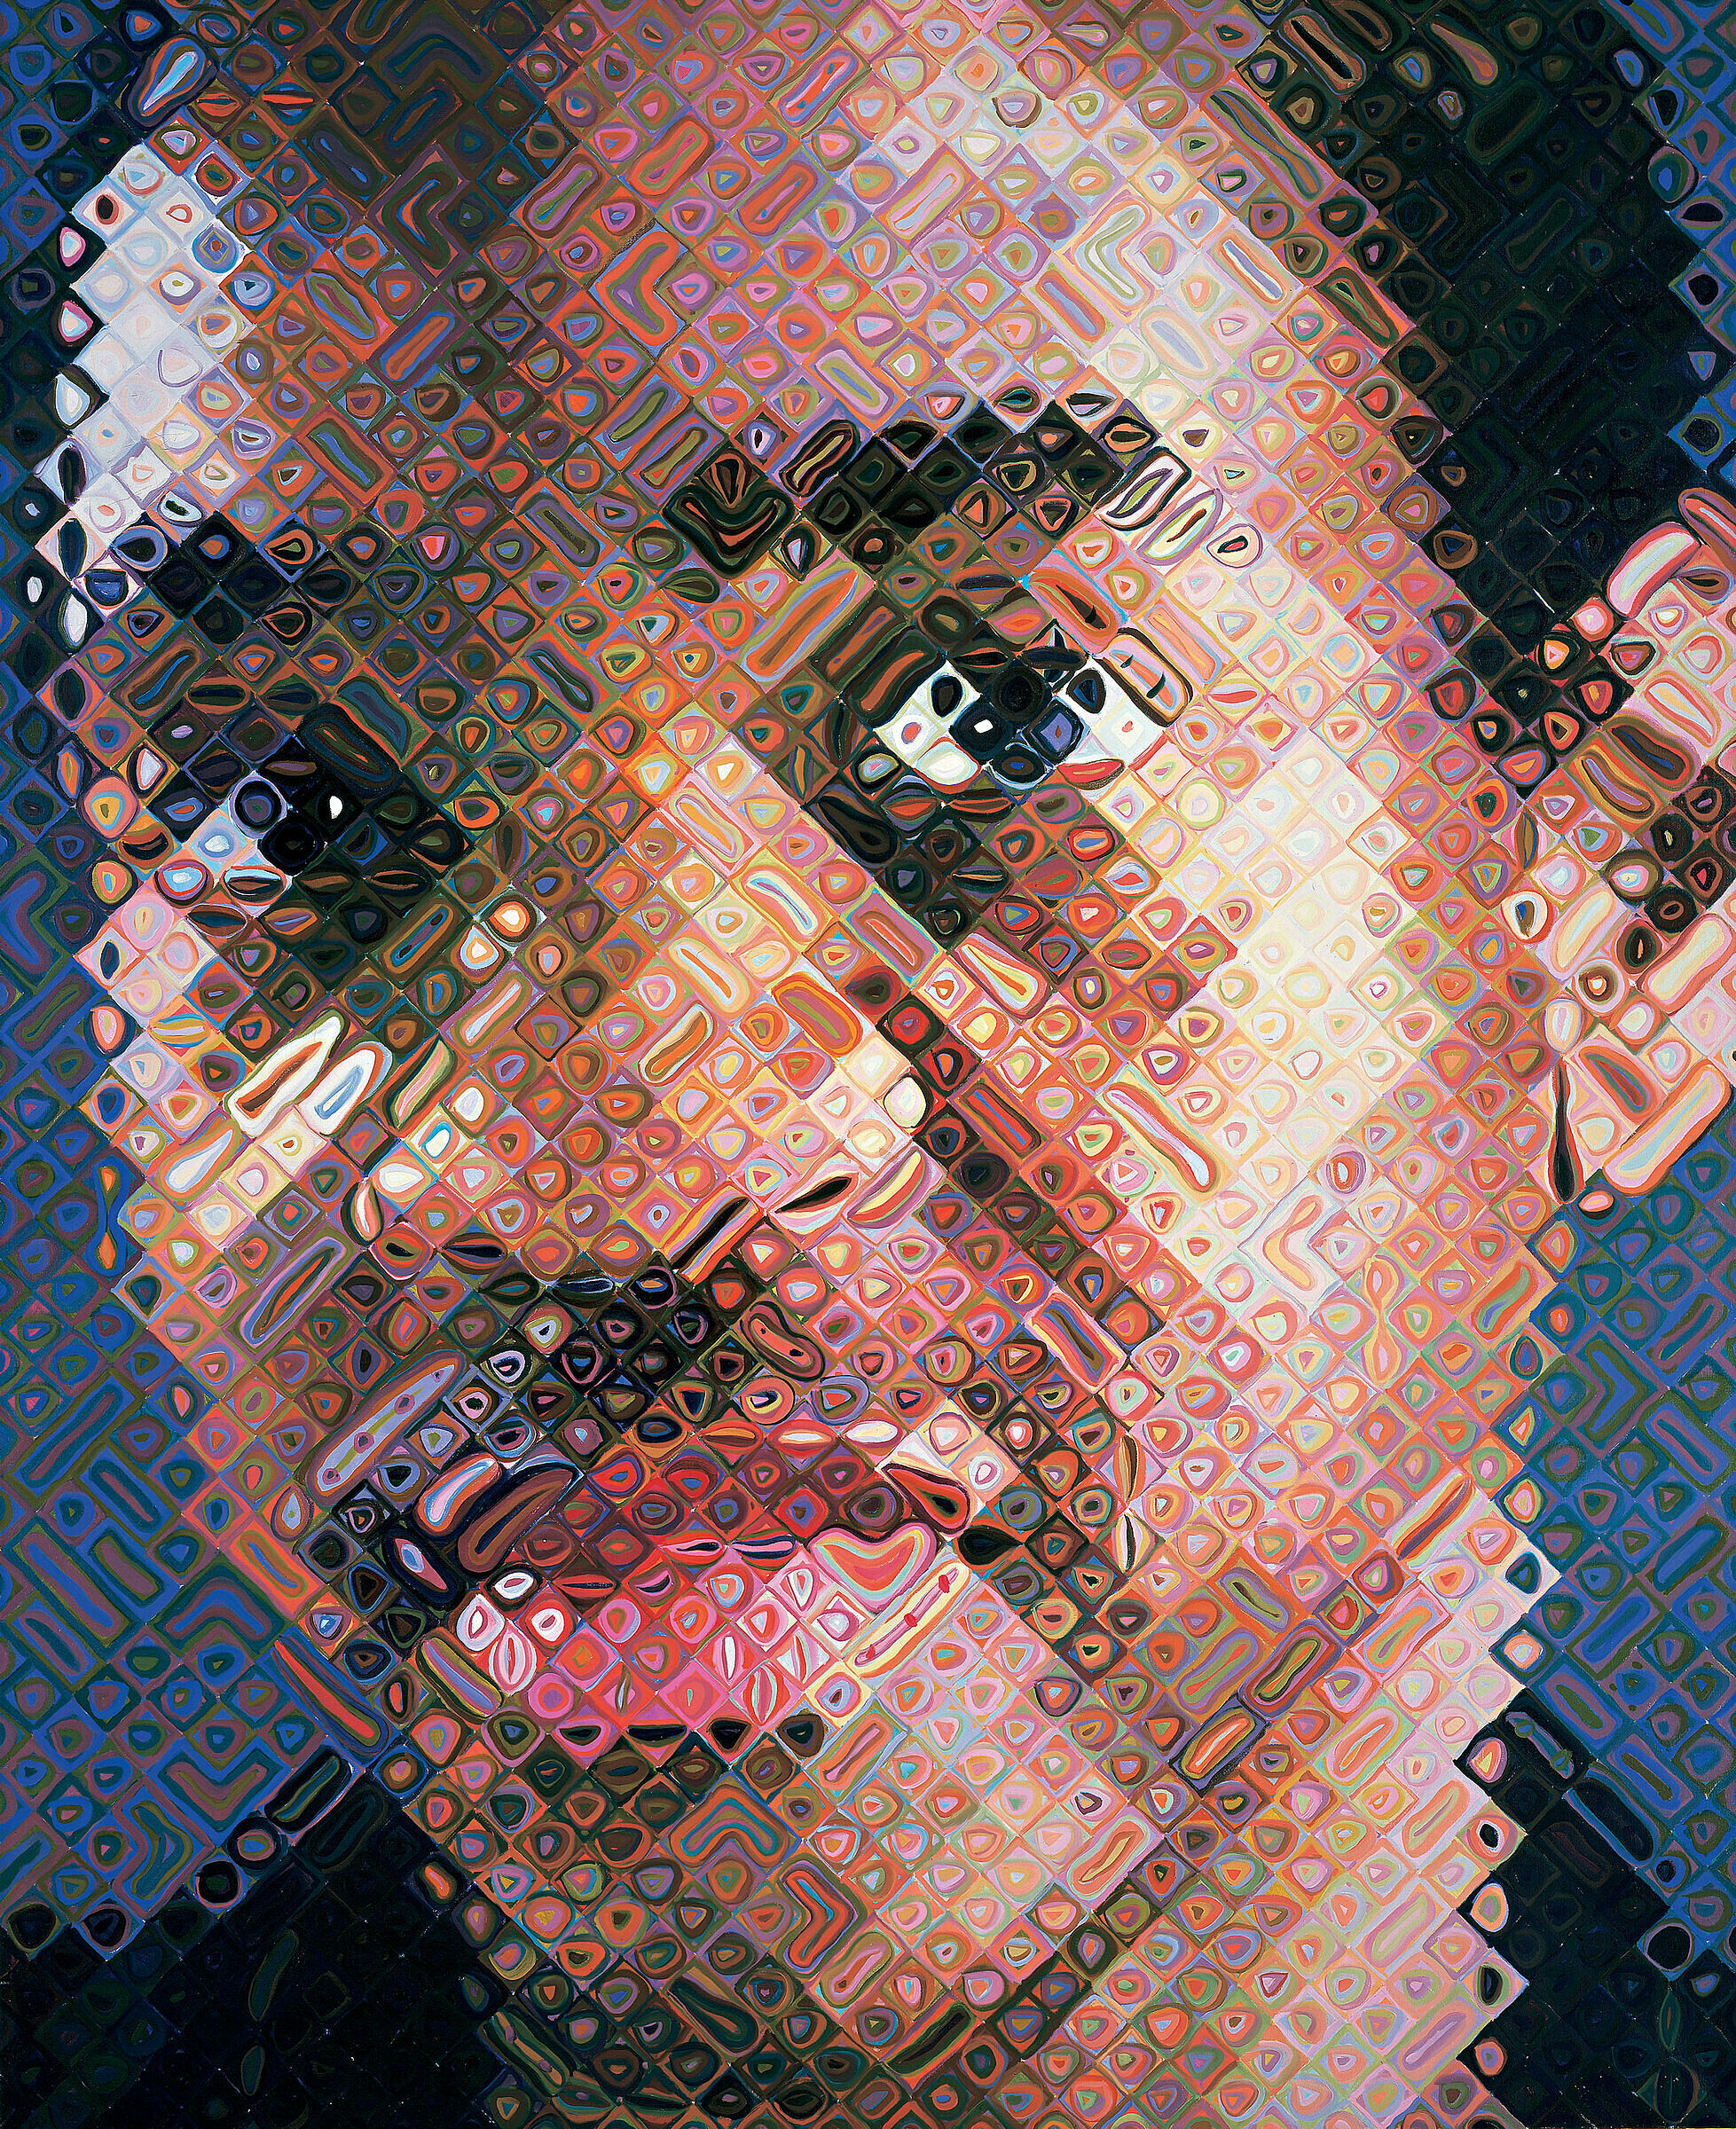 A work by Chuck Close. The face of artist Lyle Ashton Harris depicted in pixelated detail